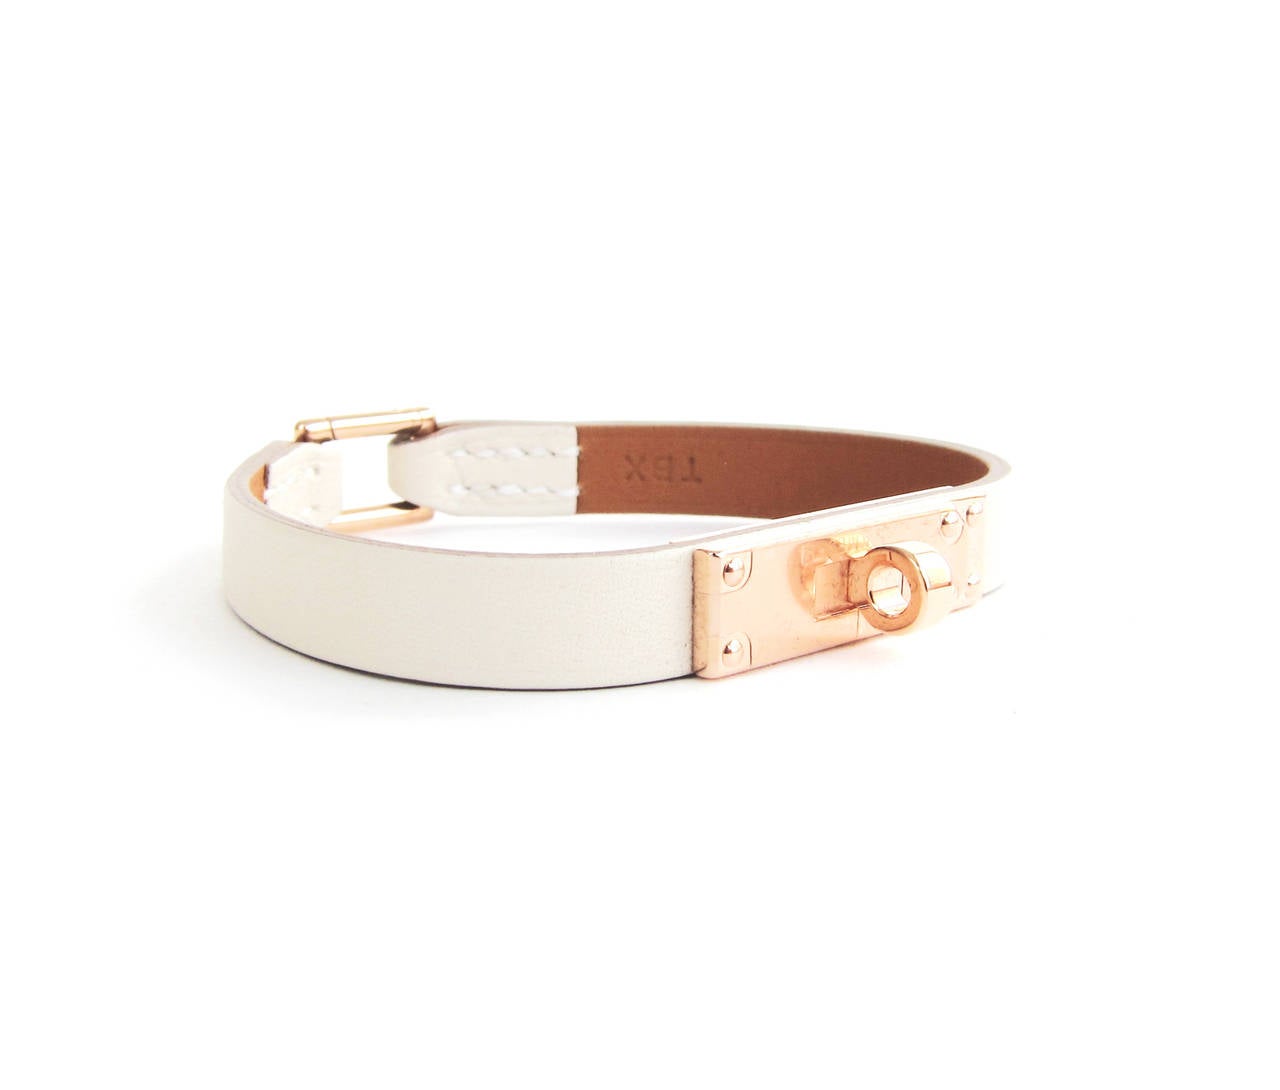 Hermes Craie Swift Rose Gold Micro Kelly Leather Bracelet Small 
Brand New in Box Coming with Hermes velvet pouch, box and ribbon 
SOLD OUT! Latest IMPOSSIBLE TO FIND *ROSE Gold* series release
Craie (chalk) leather with Rose Gold is a divine and